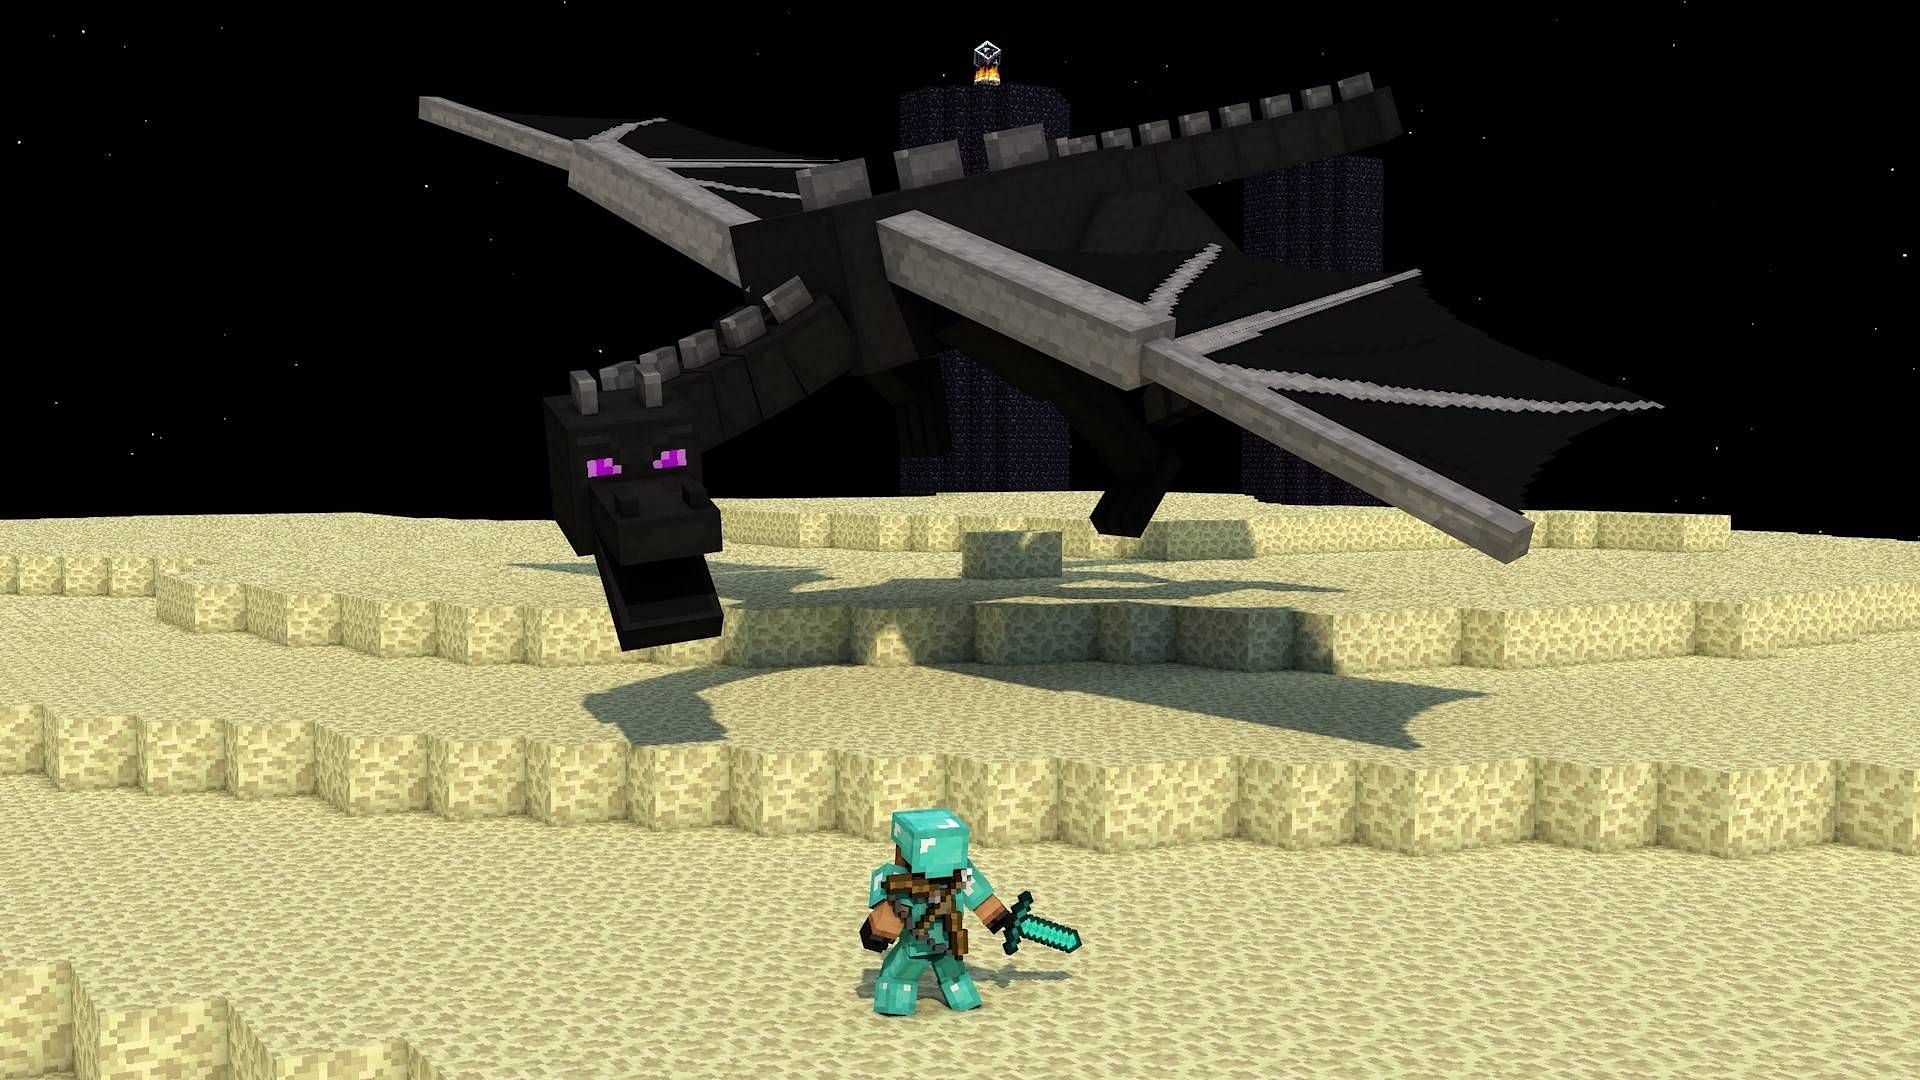 The Ender Dragon remains the only dragon in Minecraft (Image via Mojang)